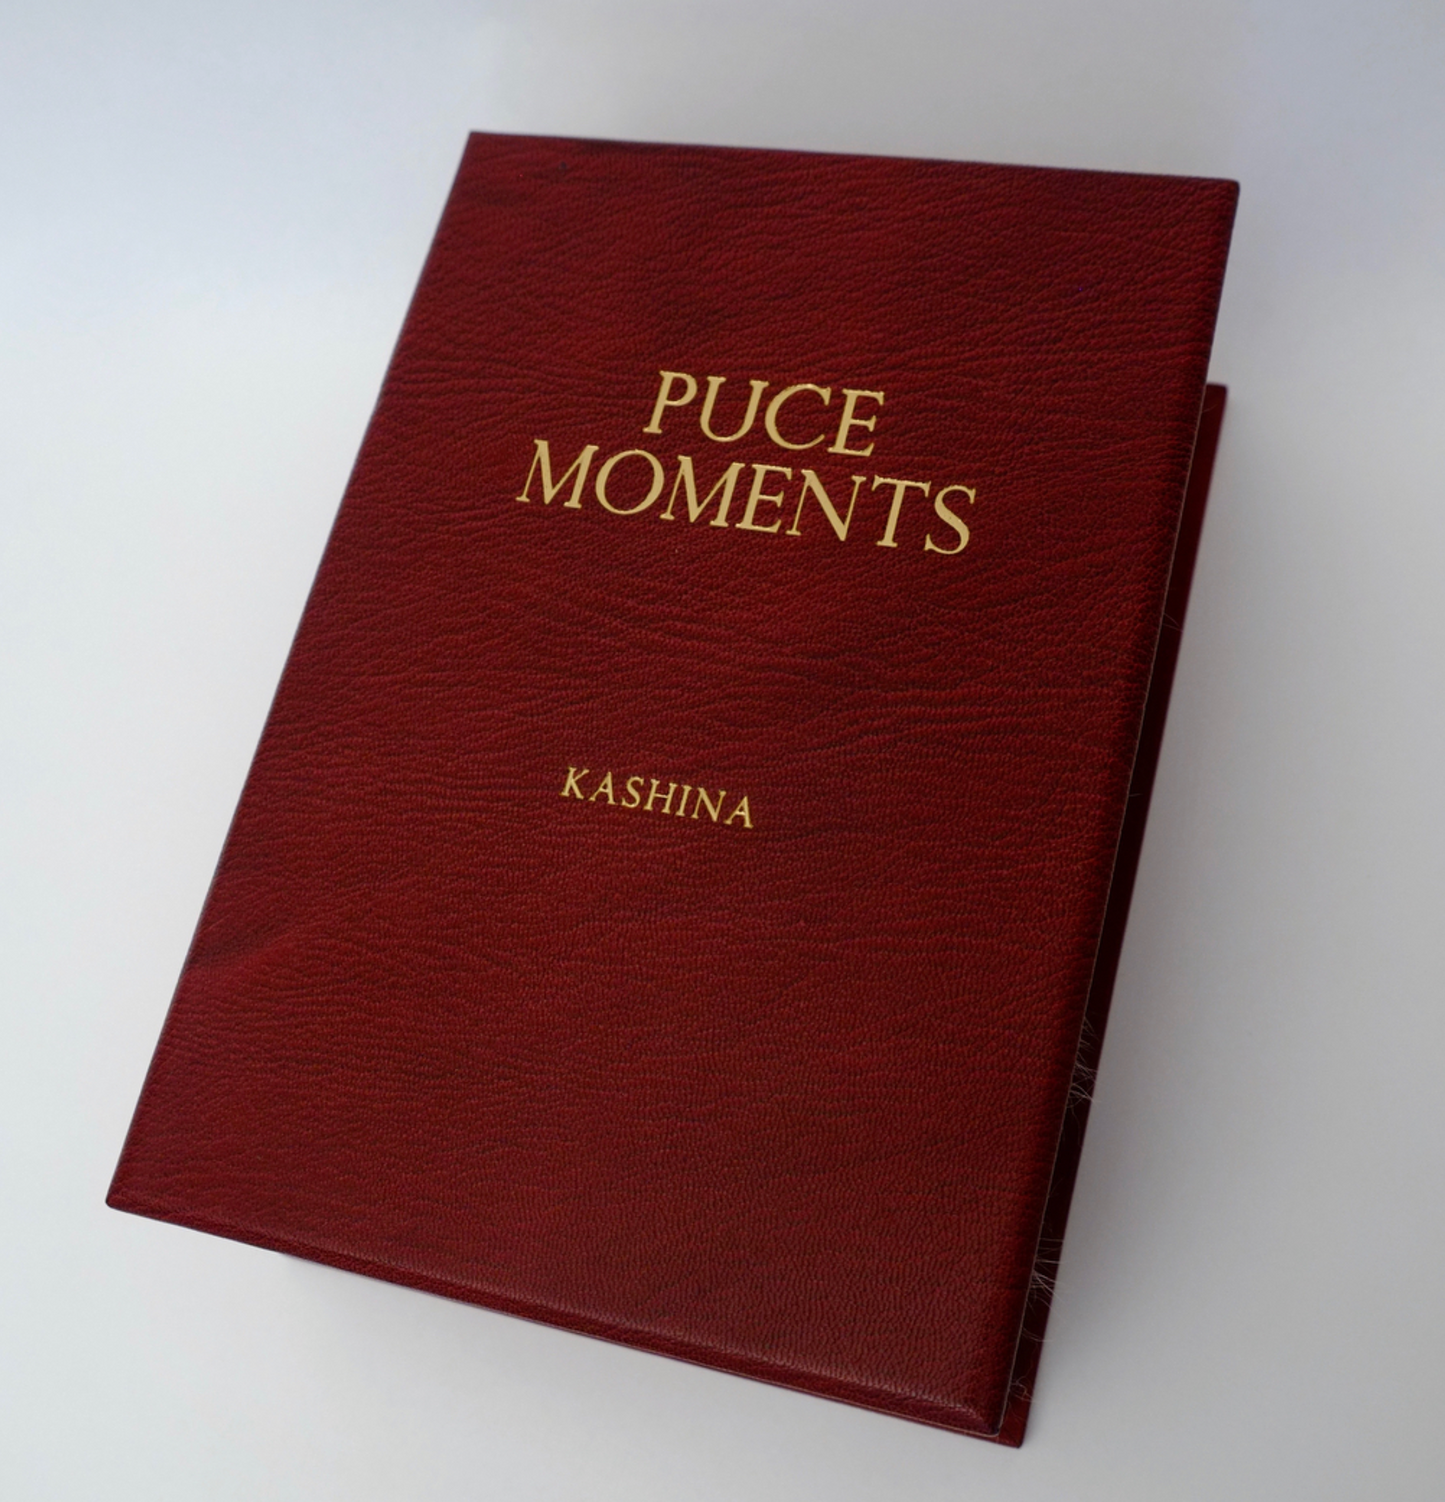 Puce Moments by Kashina (Deluxe Edition)